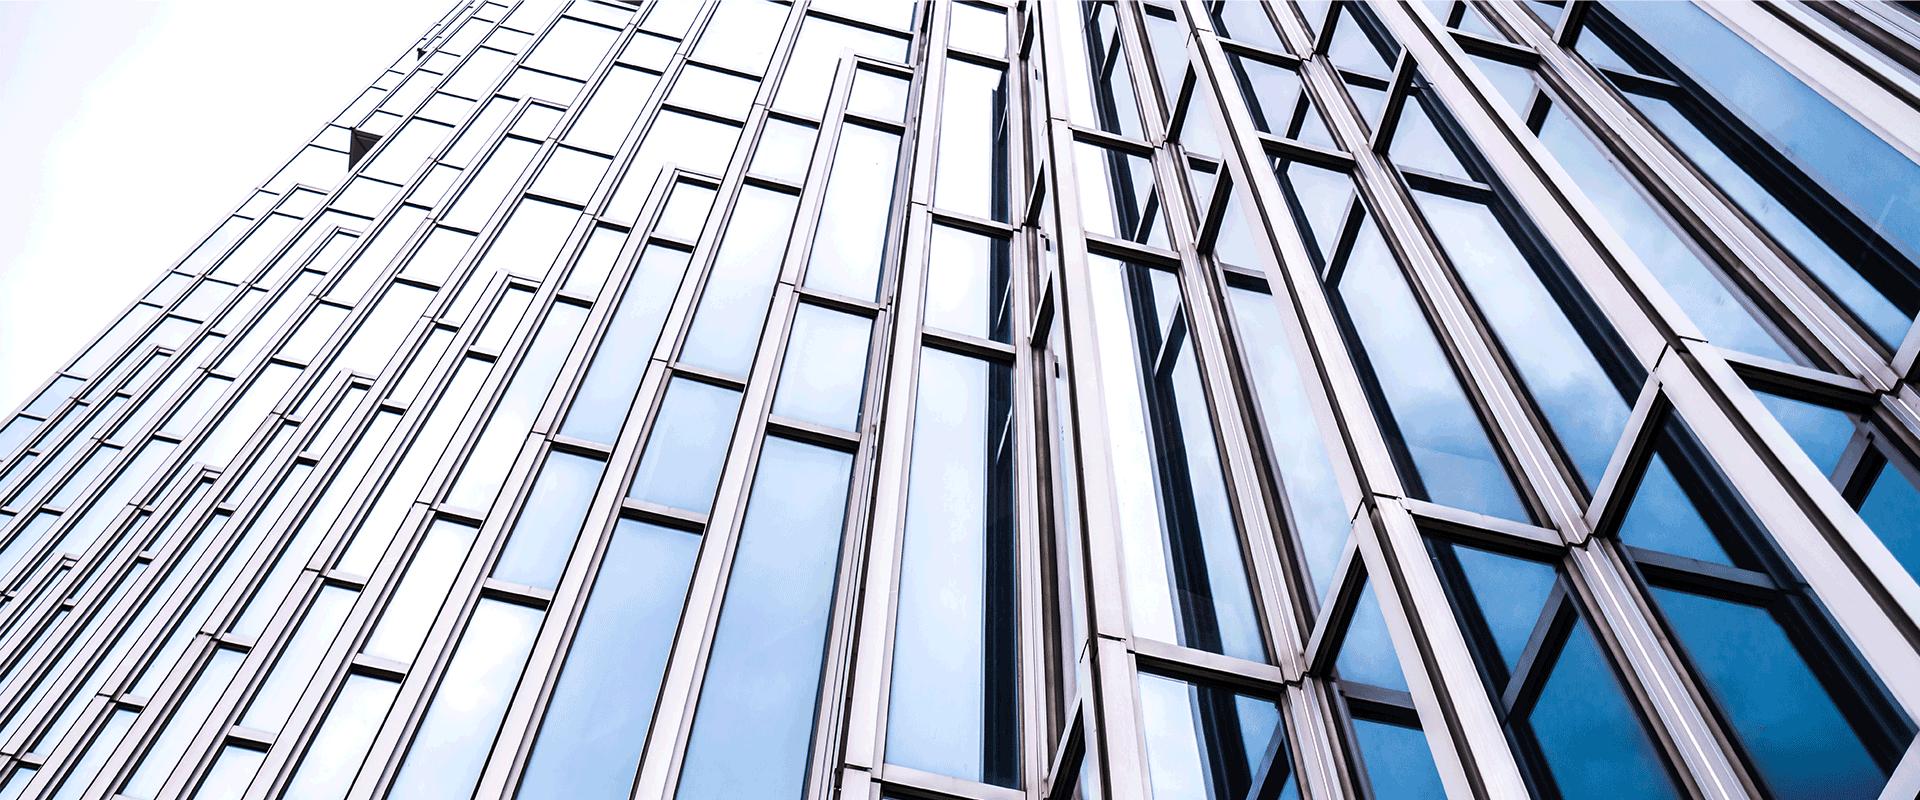 abstract image of buildings